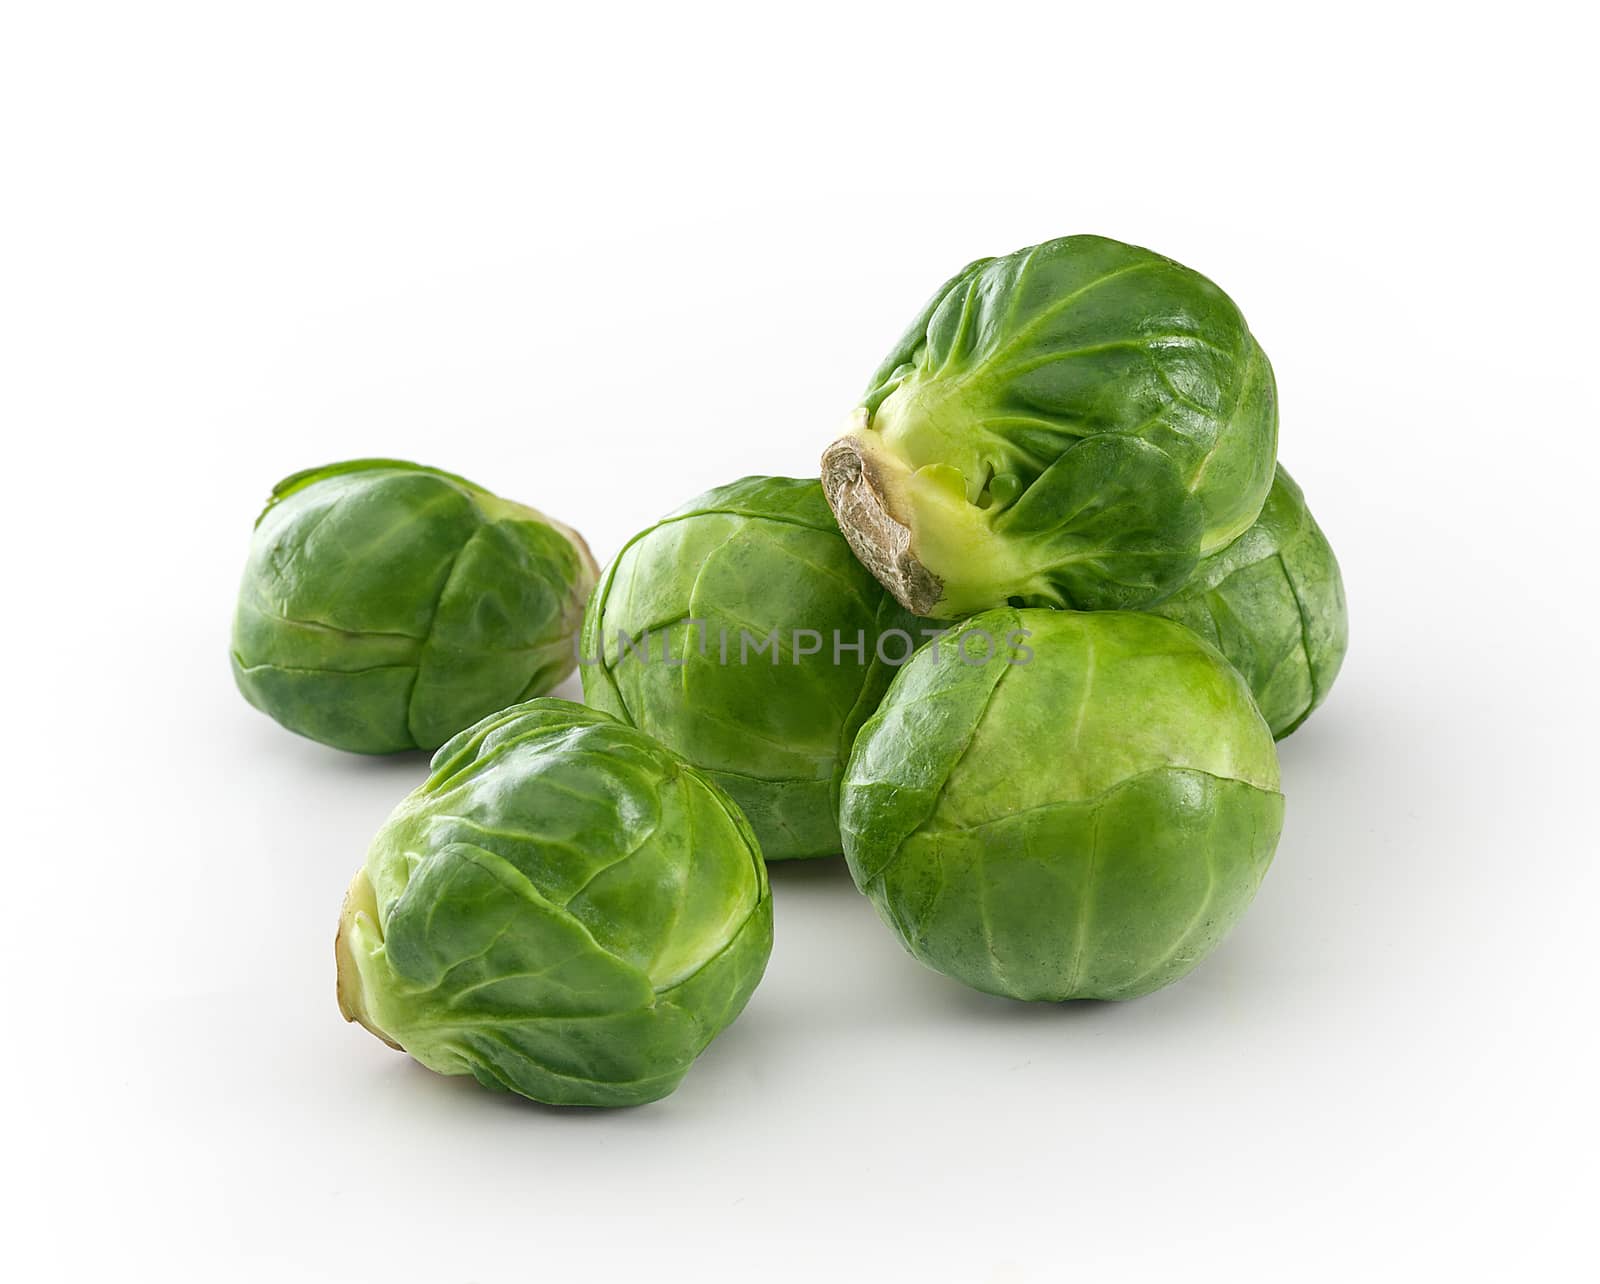 Handful of fresh green brussels sprouts on the white